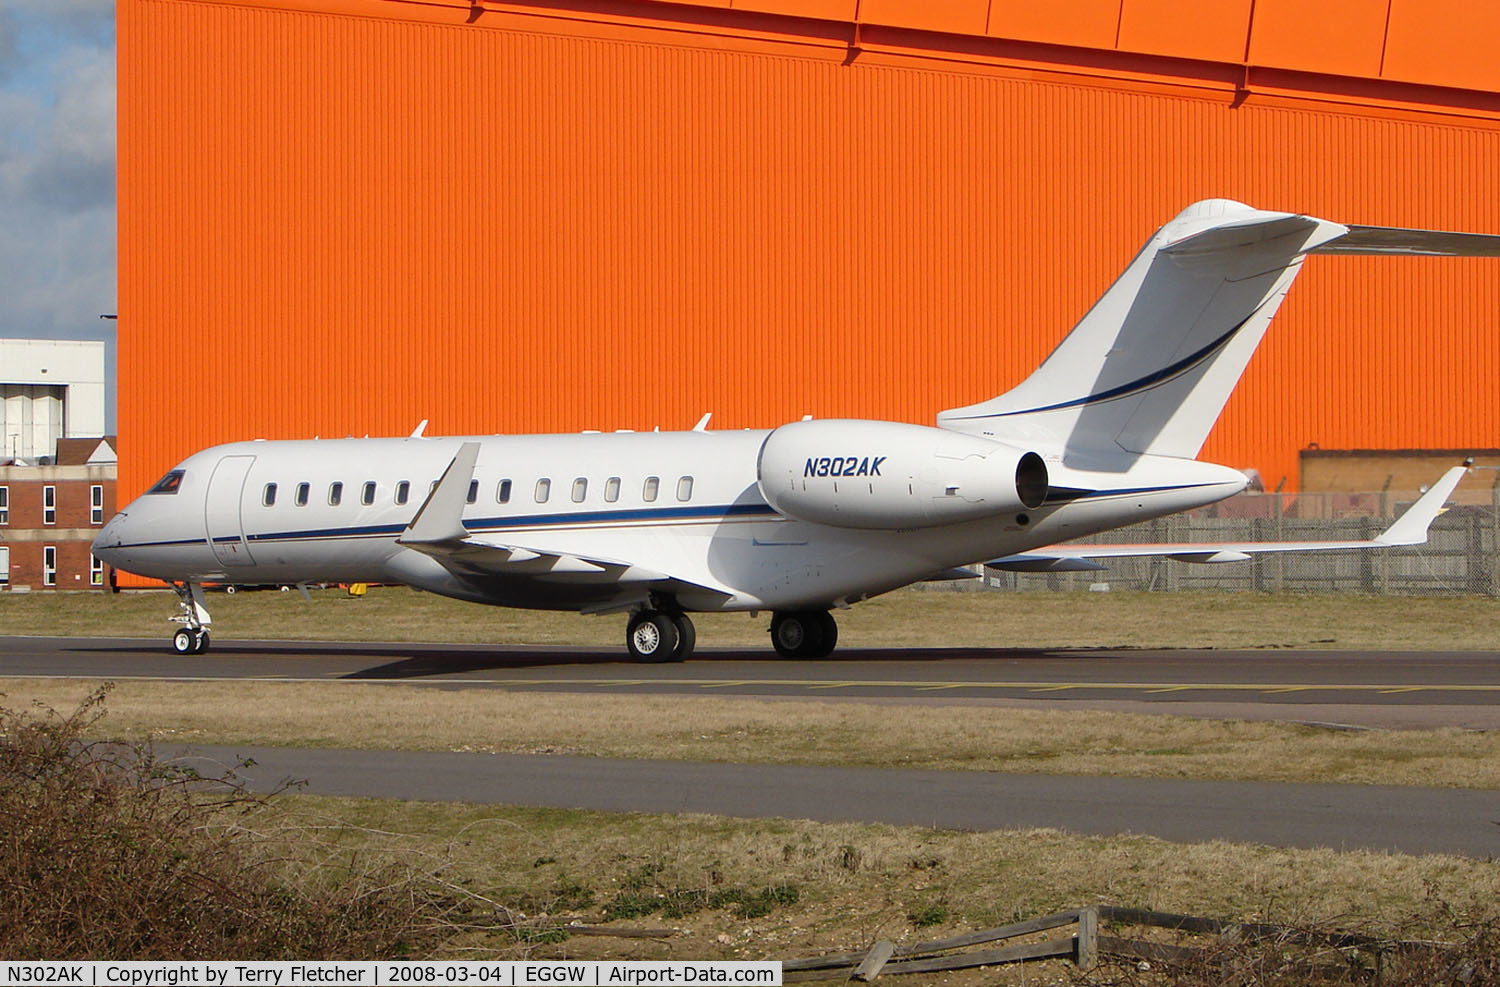 N302AK, 2005 Bombardier BD-700-1A10 Global Express XRS C/N 9181, Global Express arriving at Luton in March 2008